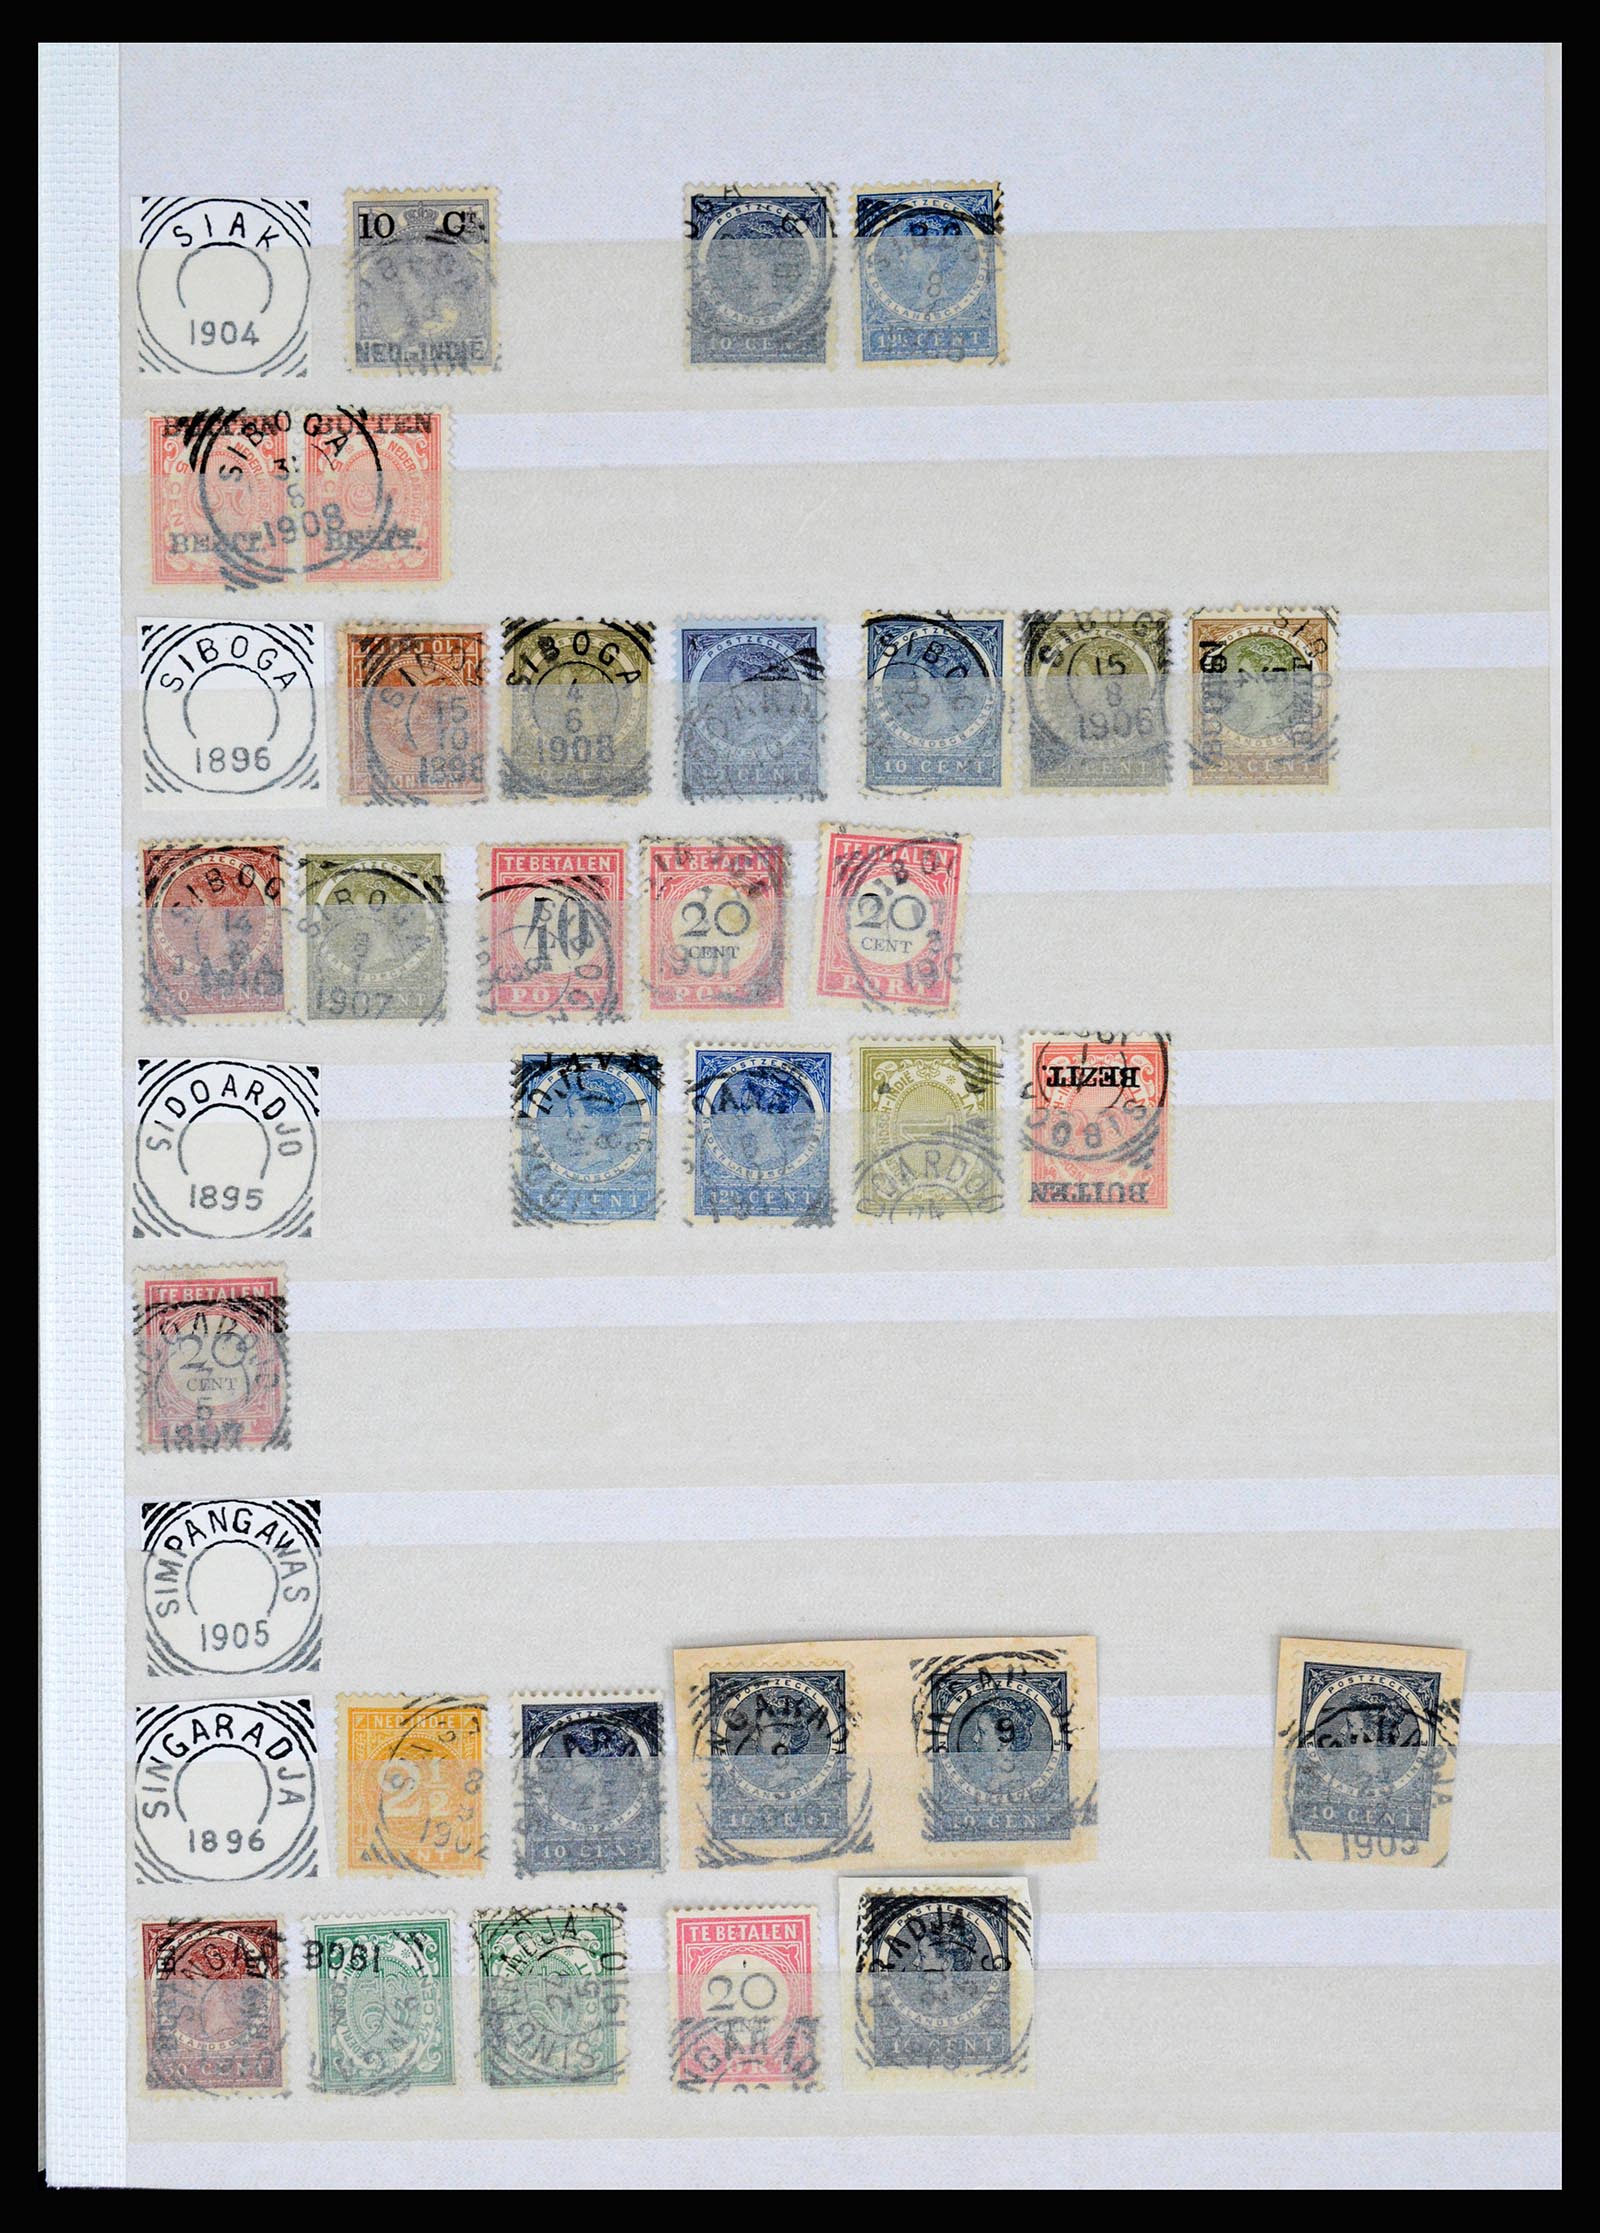 36839 090 - Stamp collection 36839 Dutch east Indies square cancels.